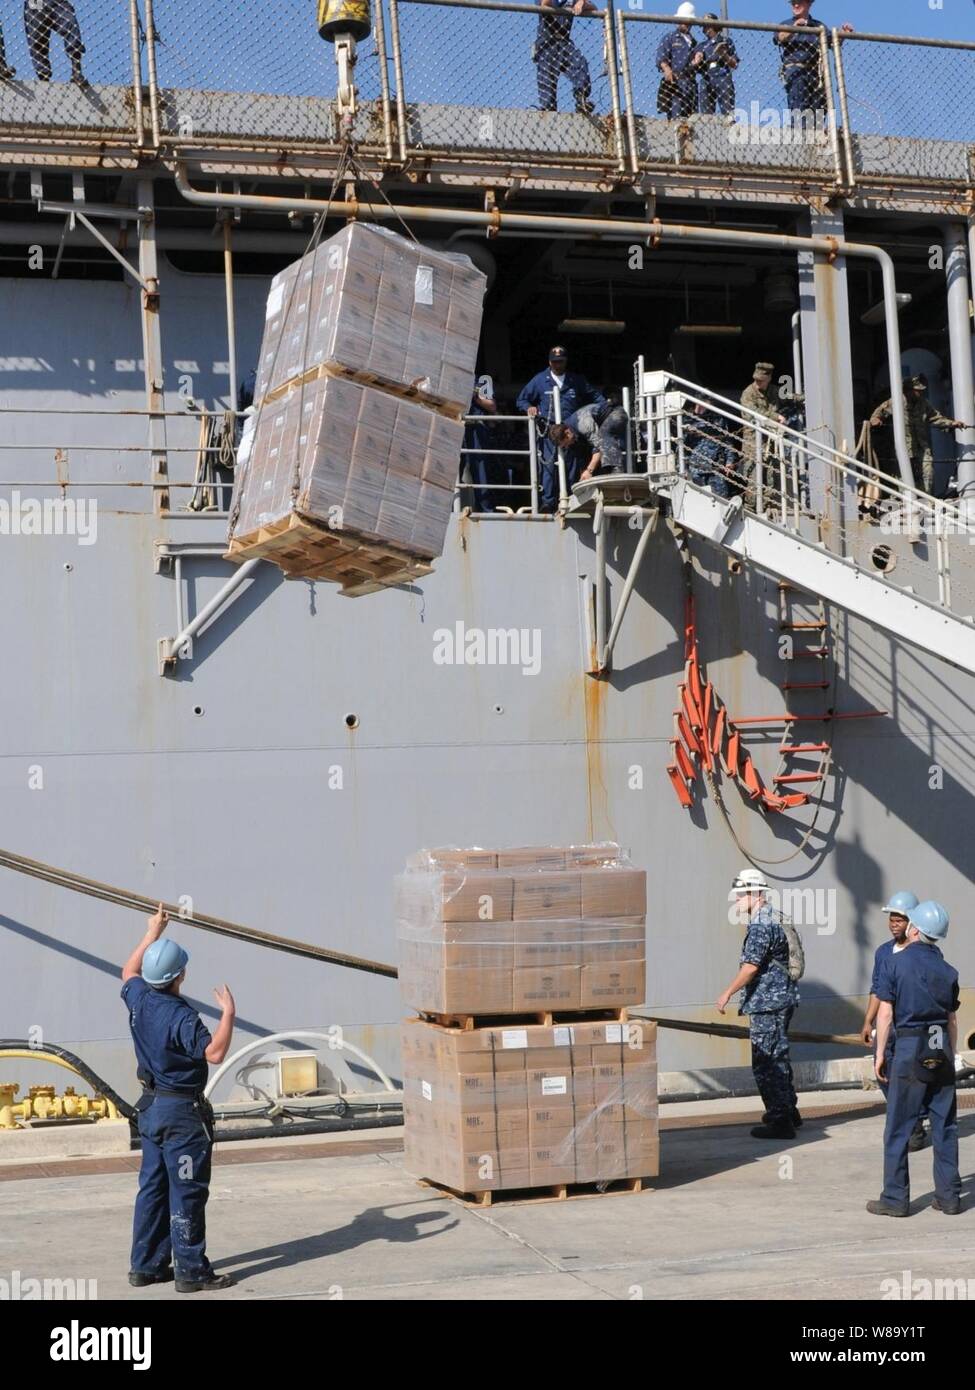 Relief supplies are loaded into the amphibious dock landing ship USS Carter Hall (LSD 50) at U.S. Naval Station Guantanamo Bay, Cuba, to support Operation Unified Response on Jan. 24, 2010.  The naval station is providing logistical support to the Carter Hall while the ship prepares for its humanitarian aid mission.  The Carter Hall will be transporting supplies and Marines from Combat Logistics Battalion 22 to Haiti. Stock Photo